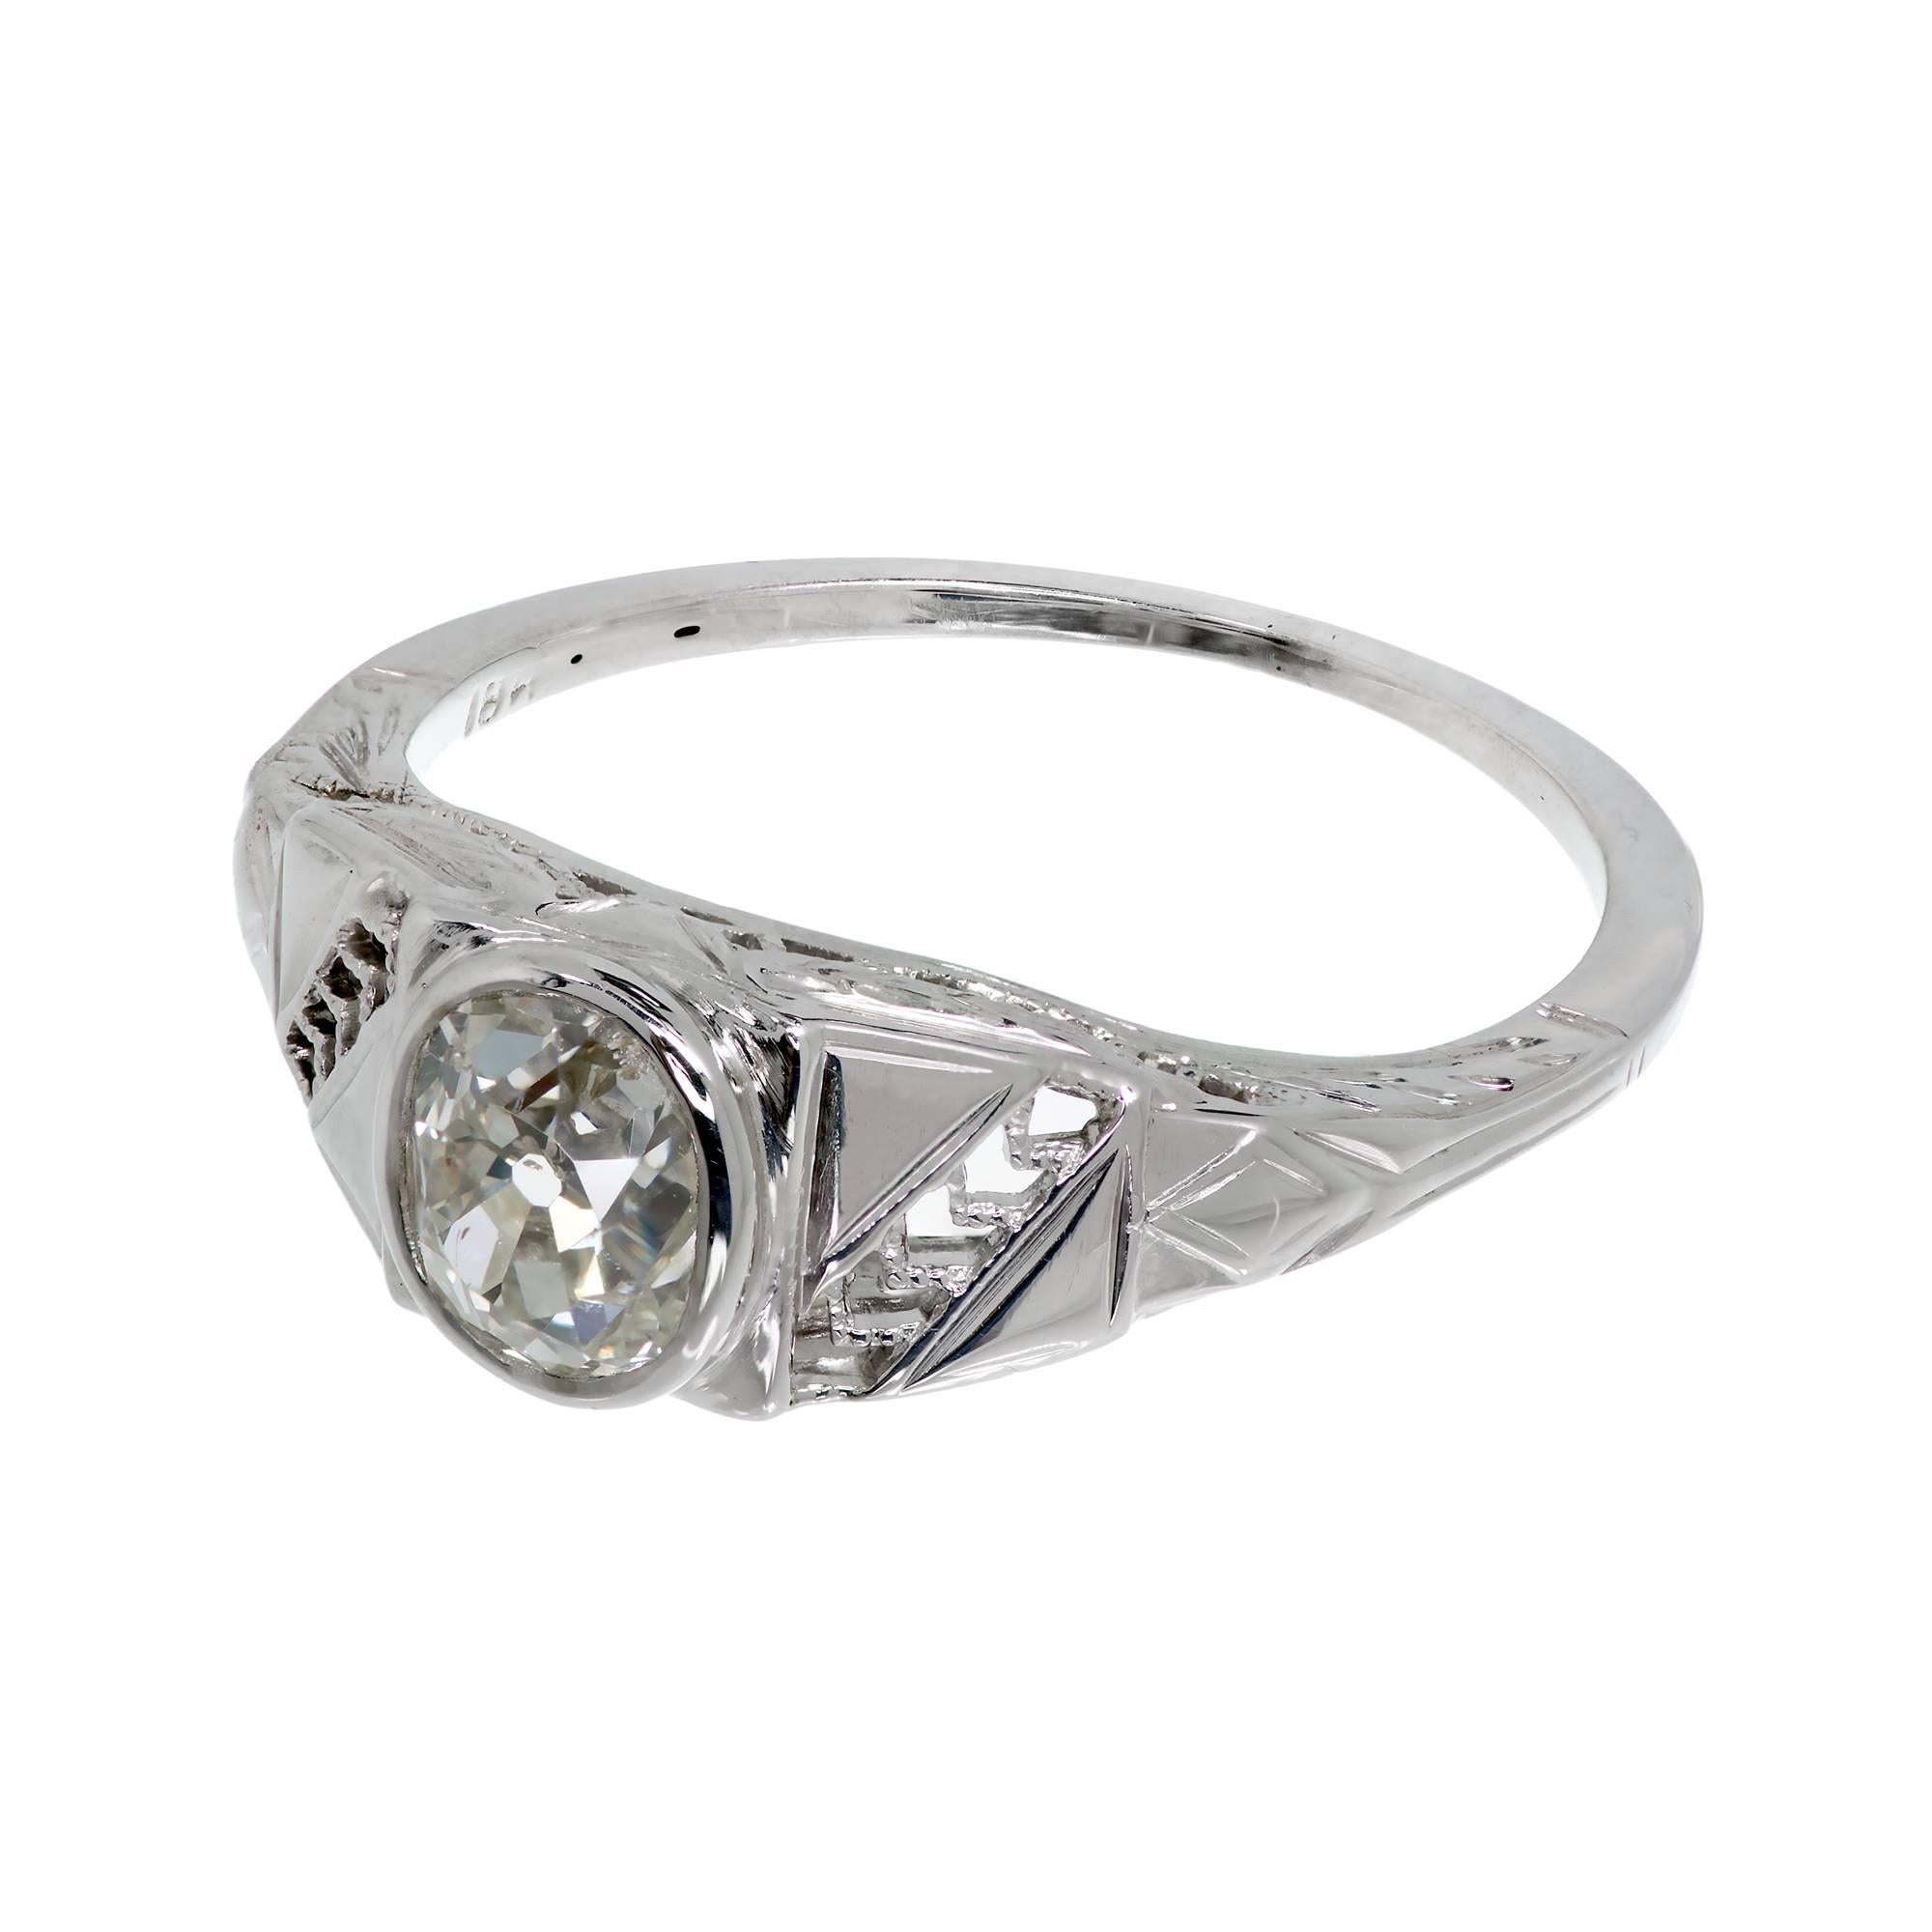 Art Deco 1930s 18k white gold engagement ring set with and old mine brilliant cut diamond cushion shape cut

1 old mine brilliant cut diamond, approx. total weight .82cts, I – J, SI2,
Size 6.25 and sizeable
18k white gold
2.4 grams
Tested and